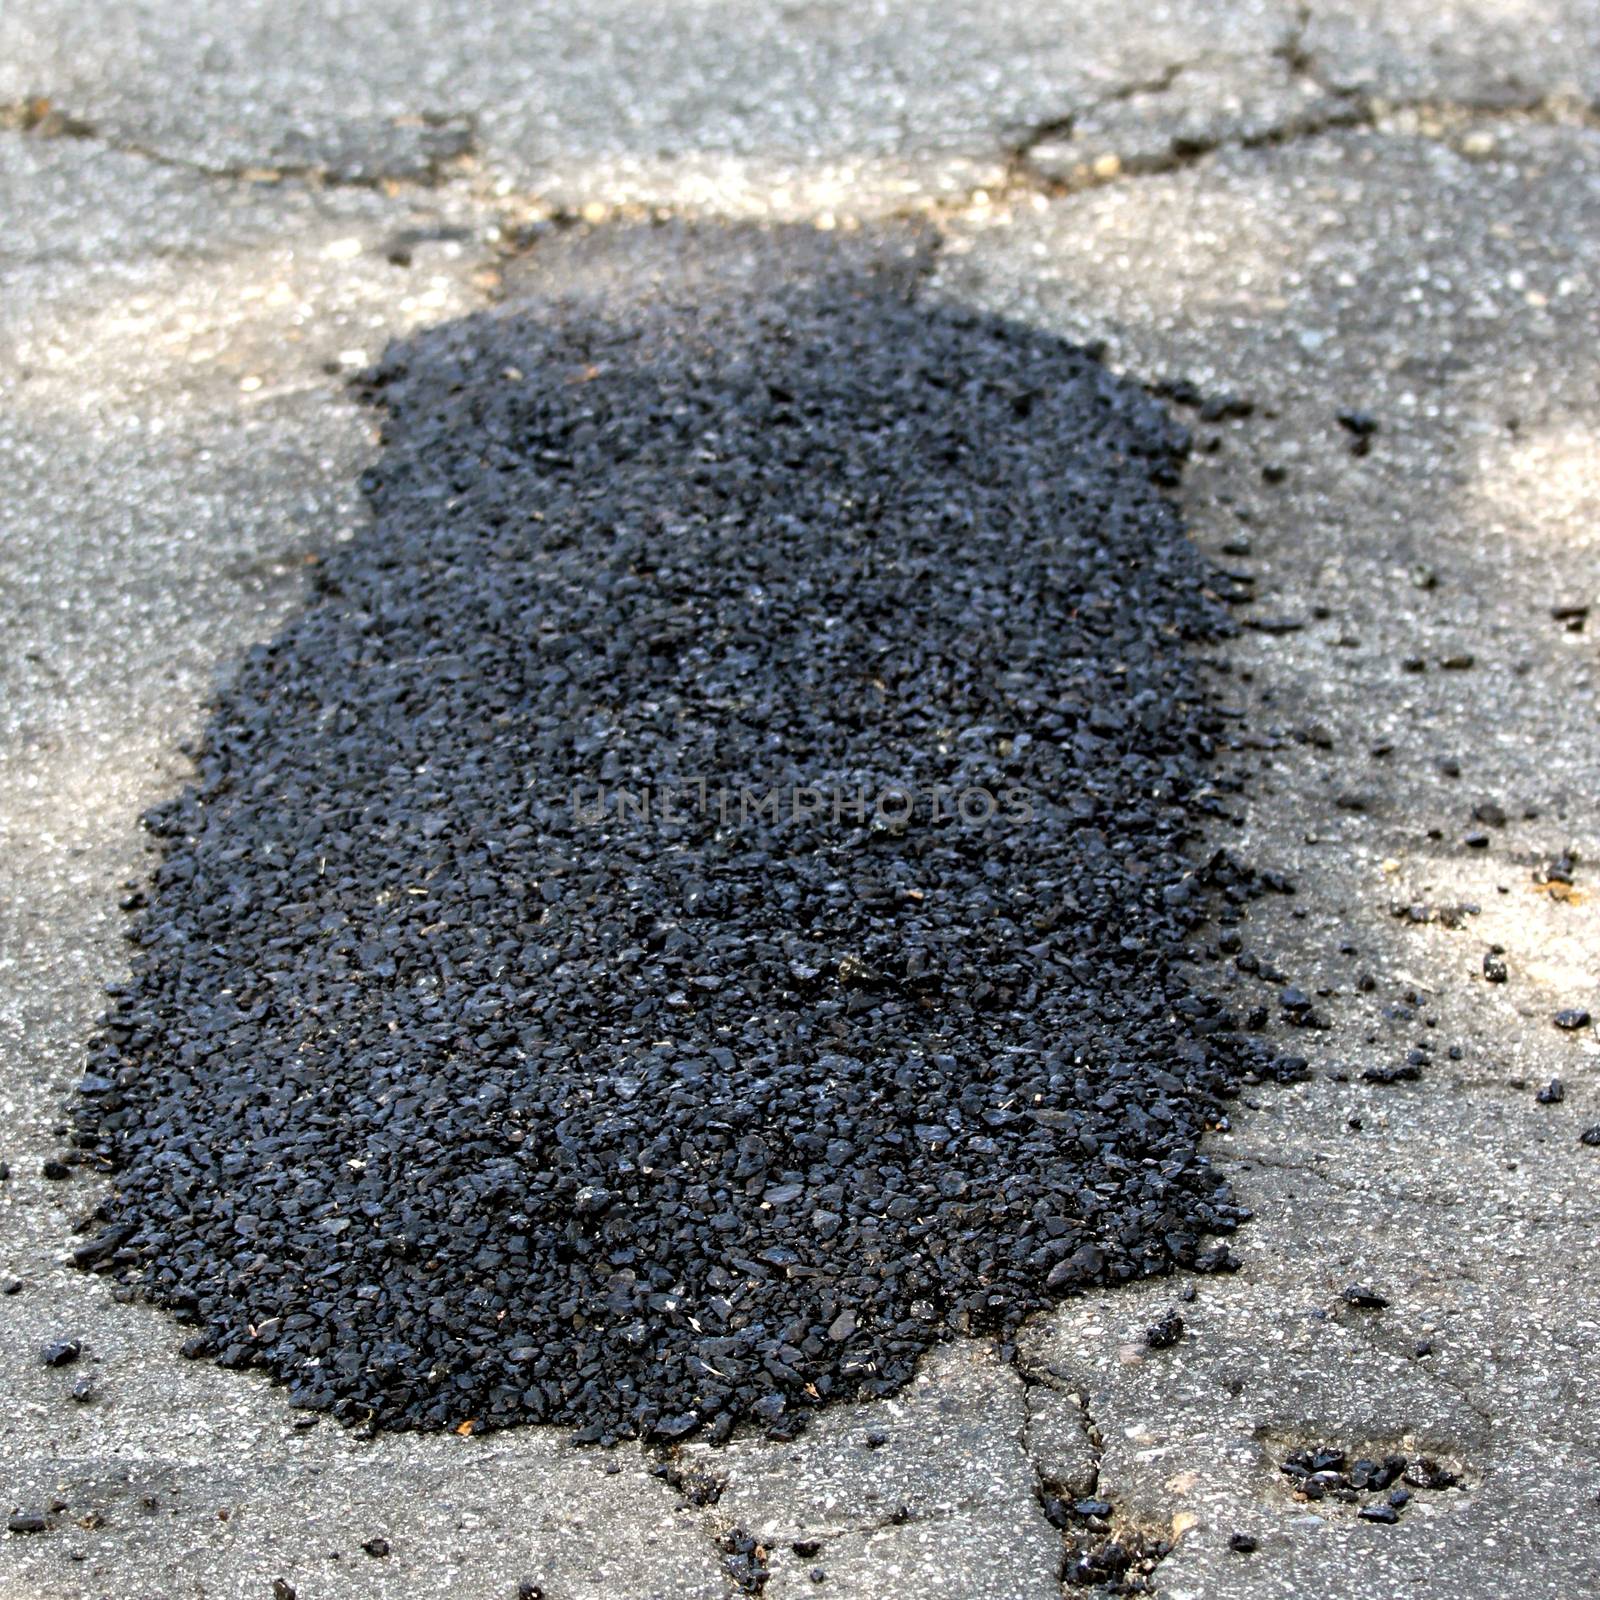 Repaired pothole with a black tarmac.